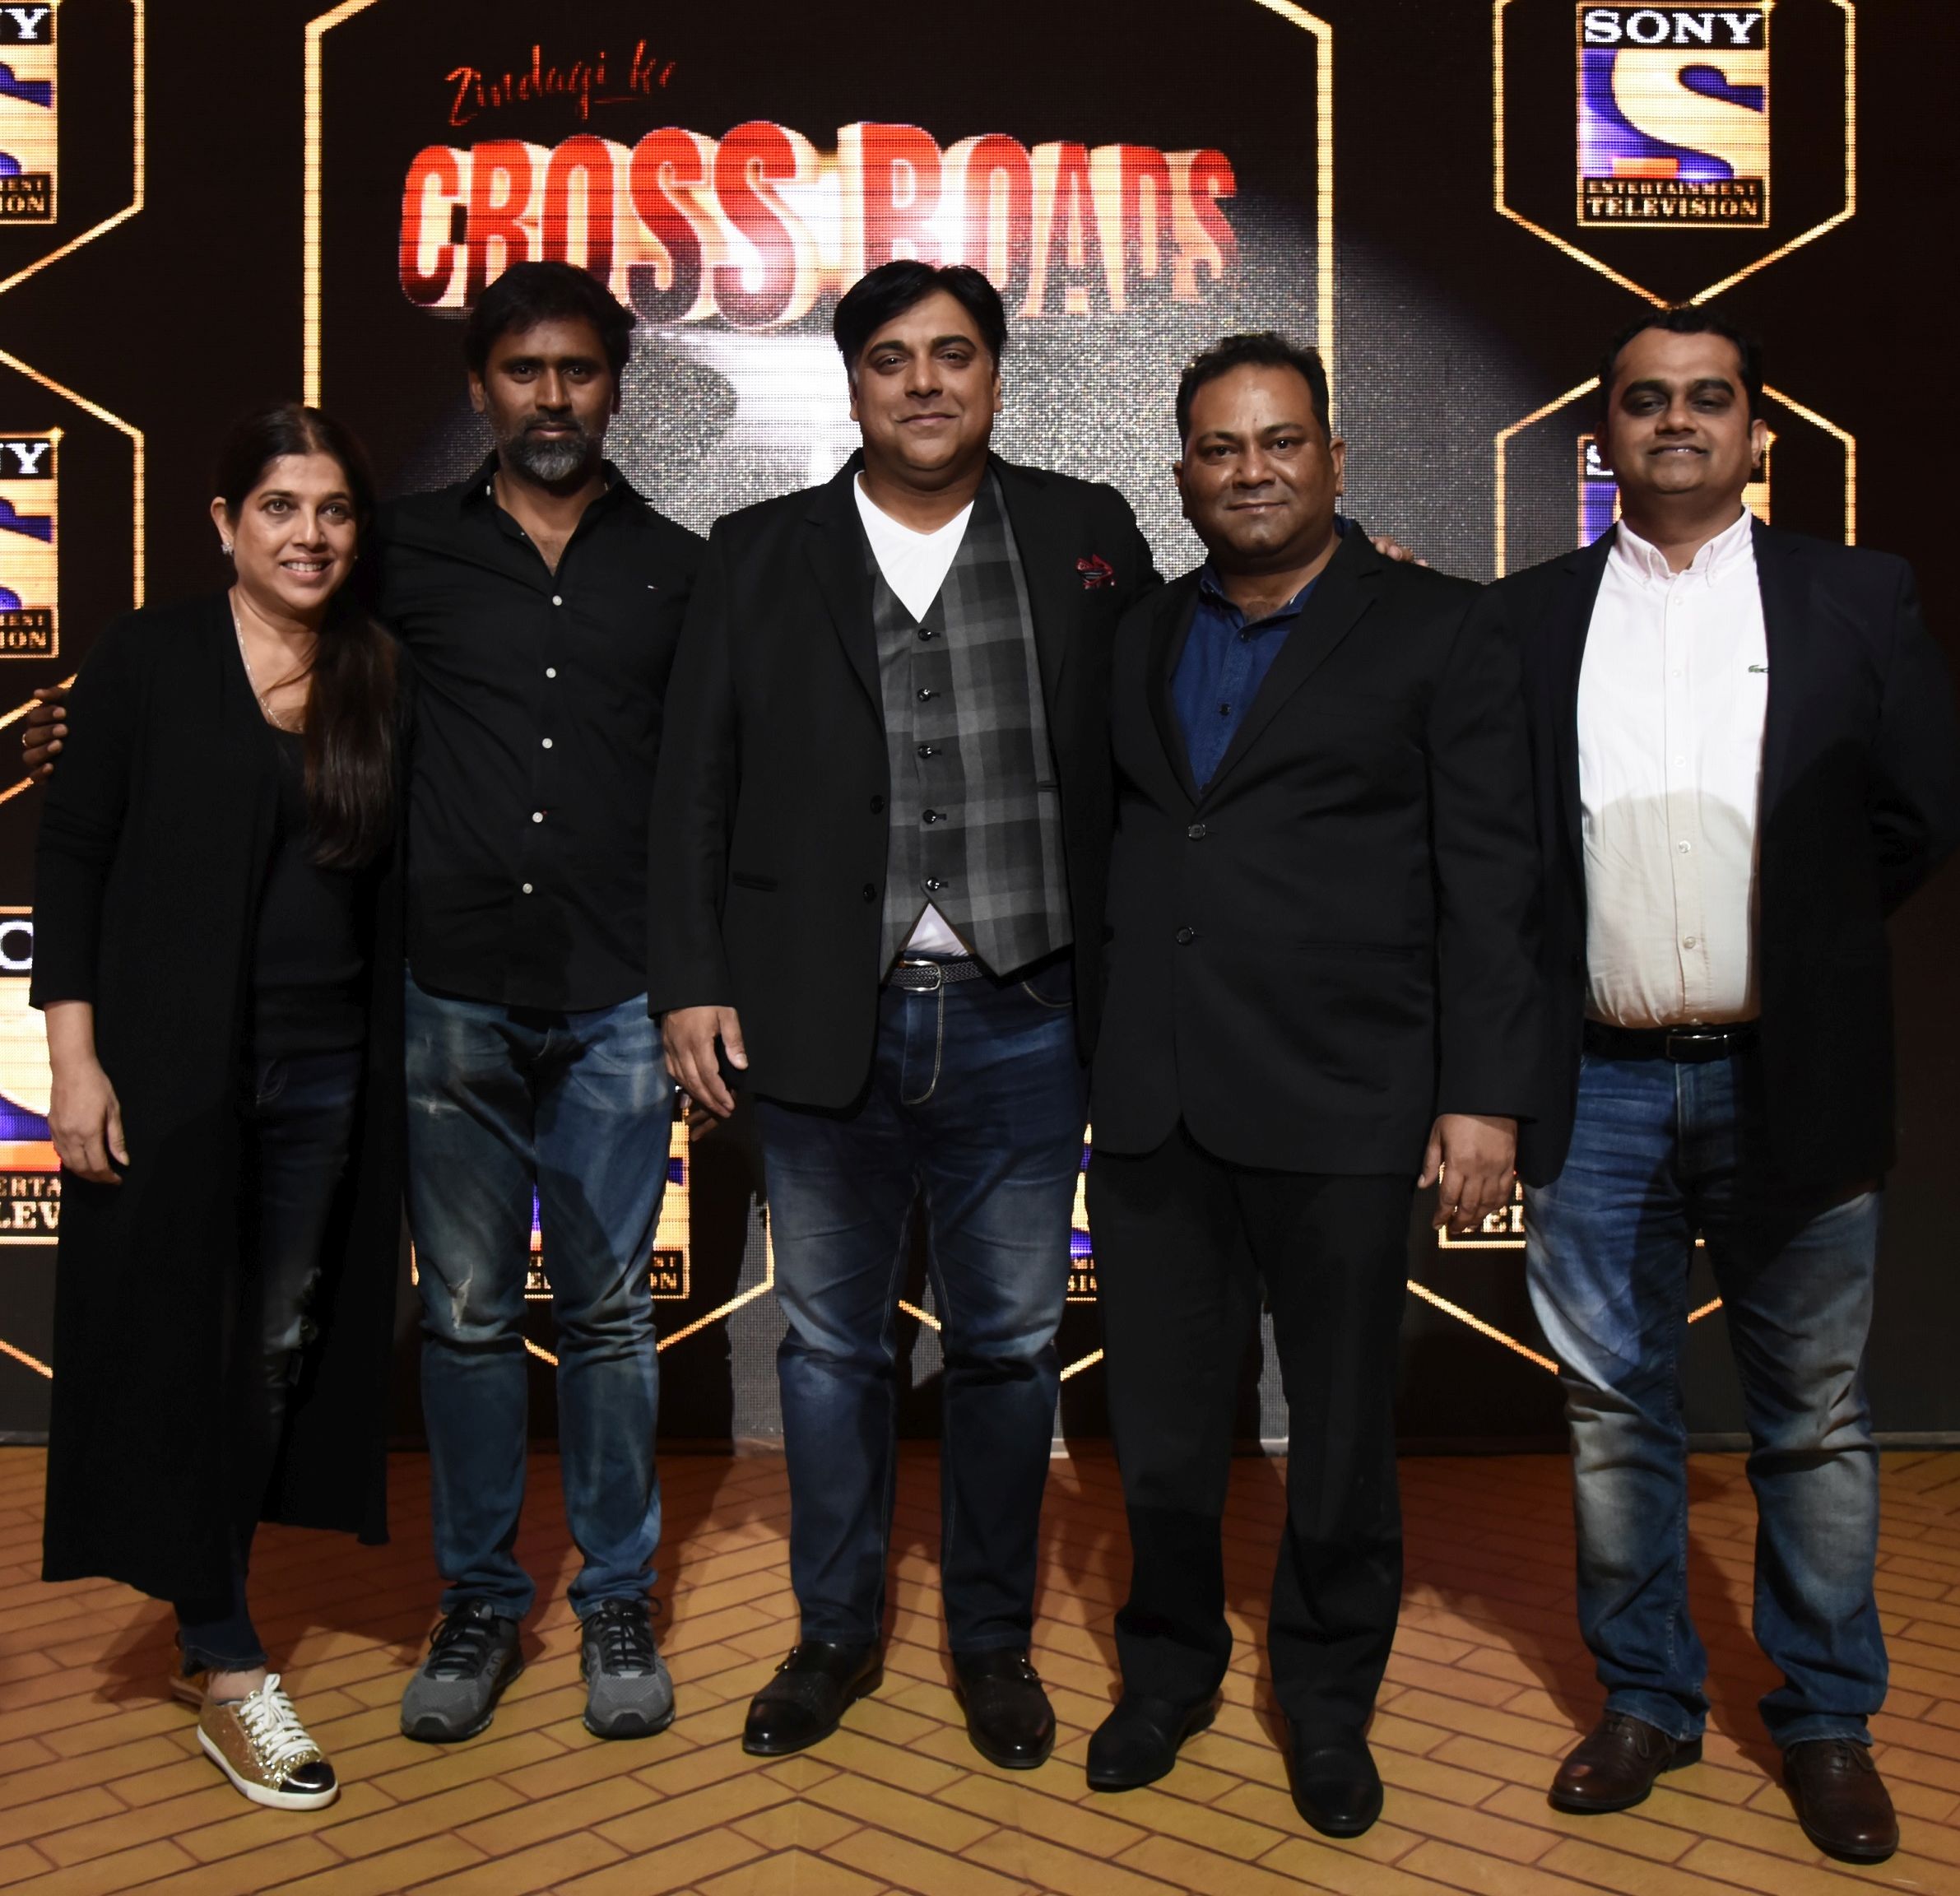 Read more about the article Zindagi Ke Crossroads Premieres 6th June at 8:30 PM On Sony Entertainment Television